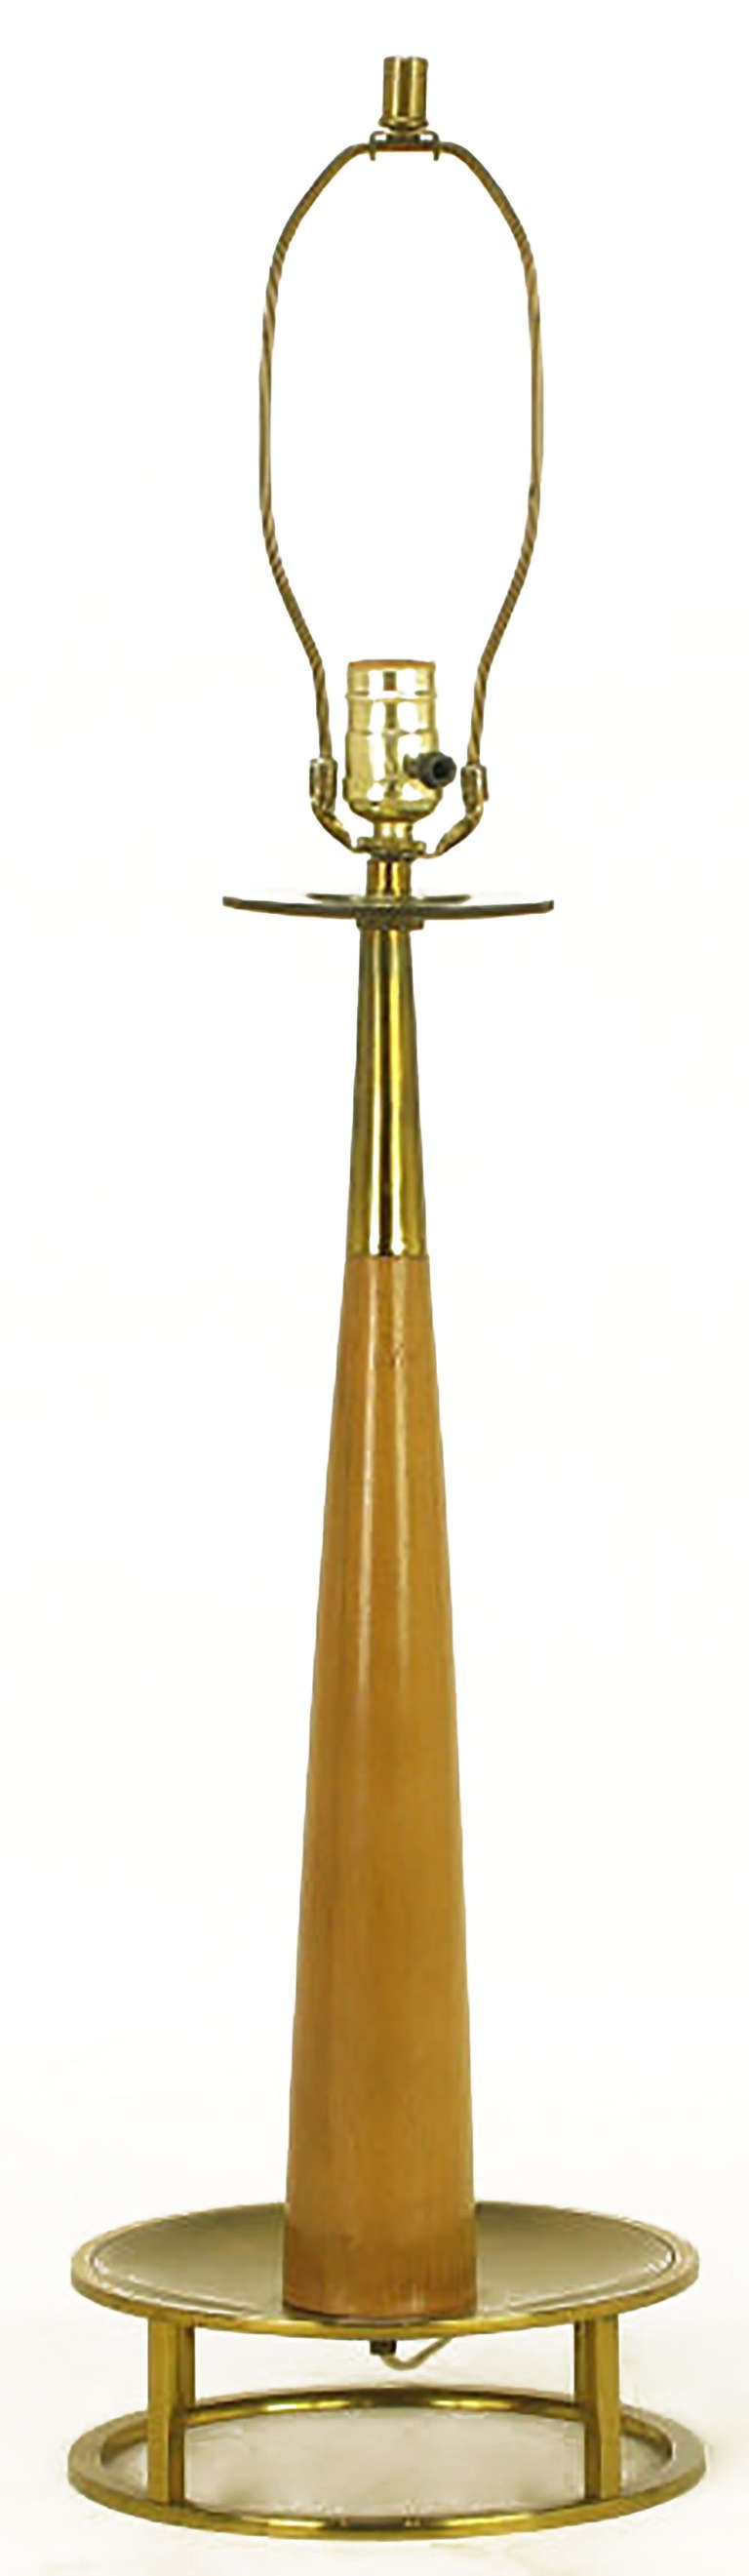 Exceptionally designed mahogany and brass open base table lamp by Stiffel. Tapered mahogany body topped with a brass stem and brass bobeche. Brass base is an open circle with four brass bar legs and brass incised border dish. Brass socket and harp.